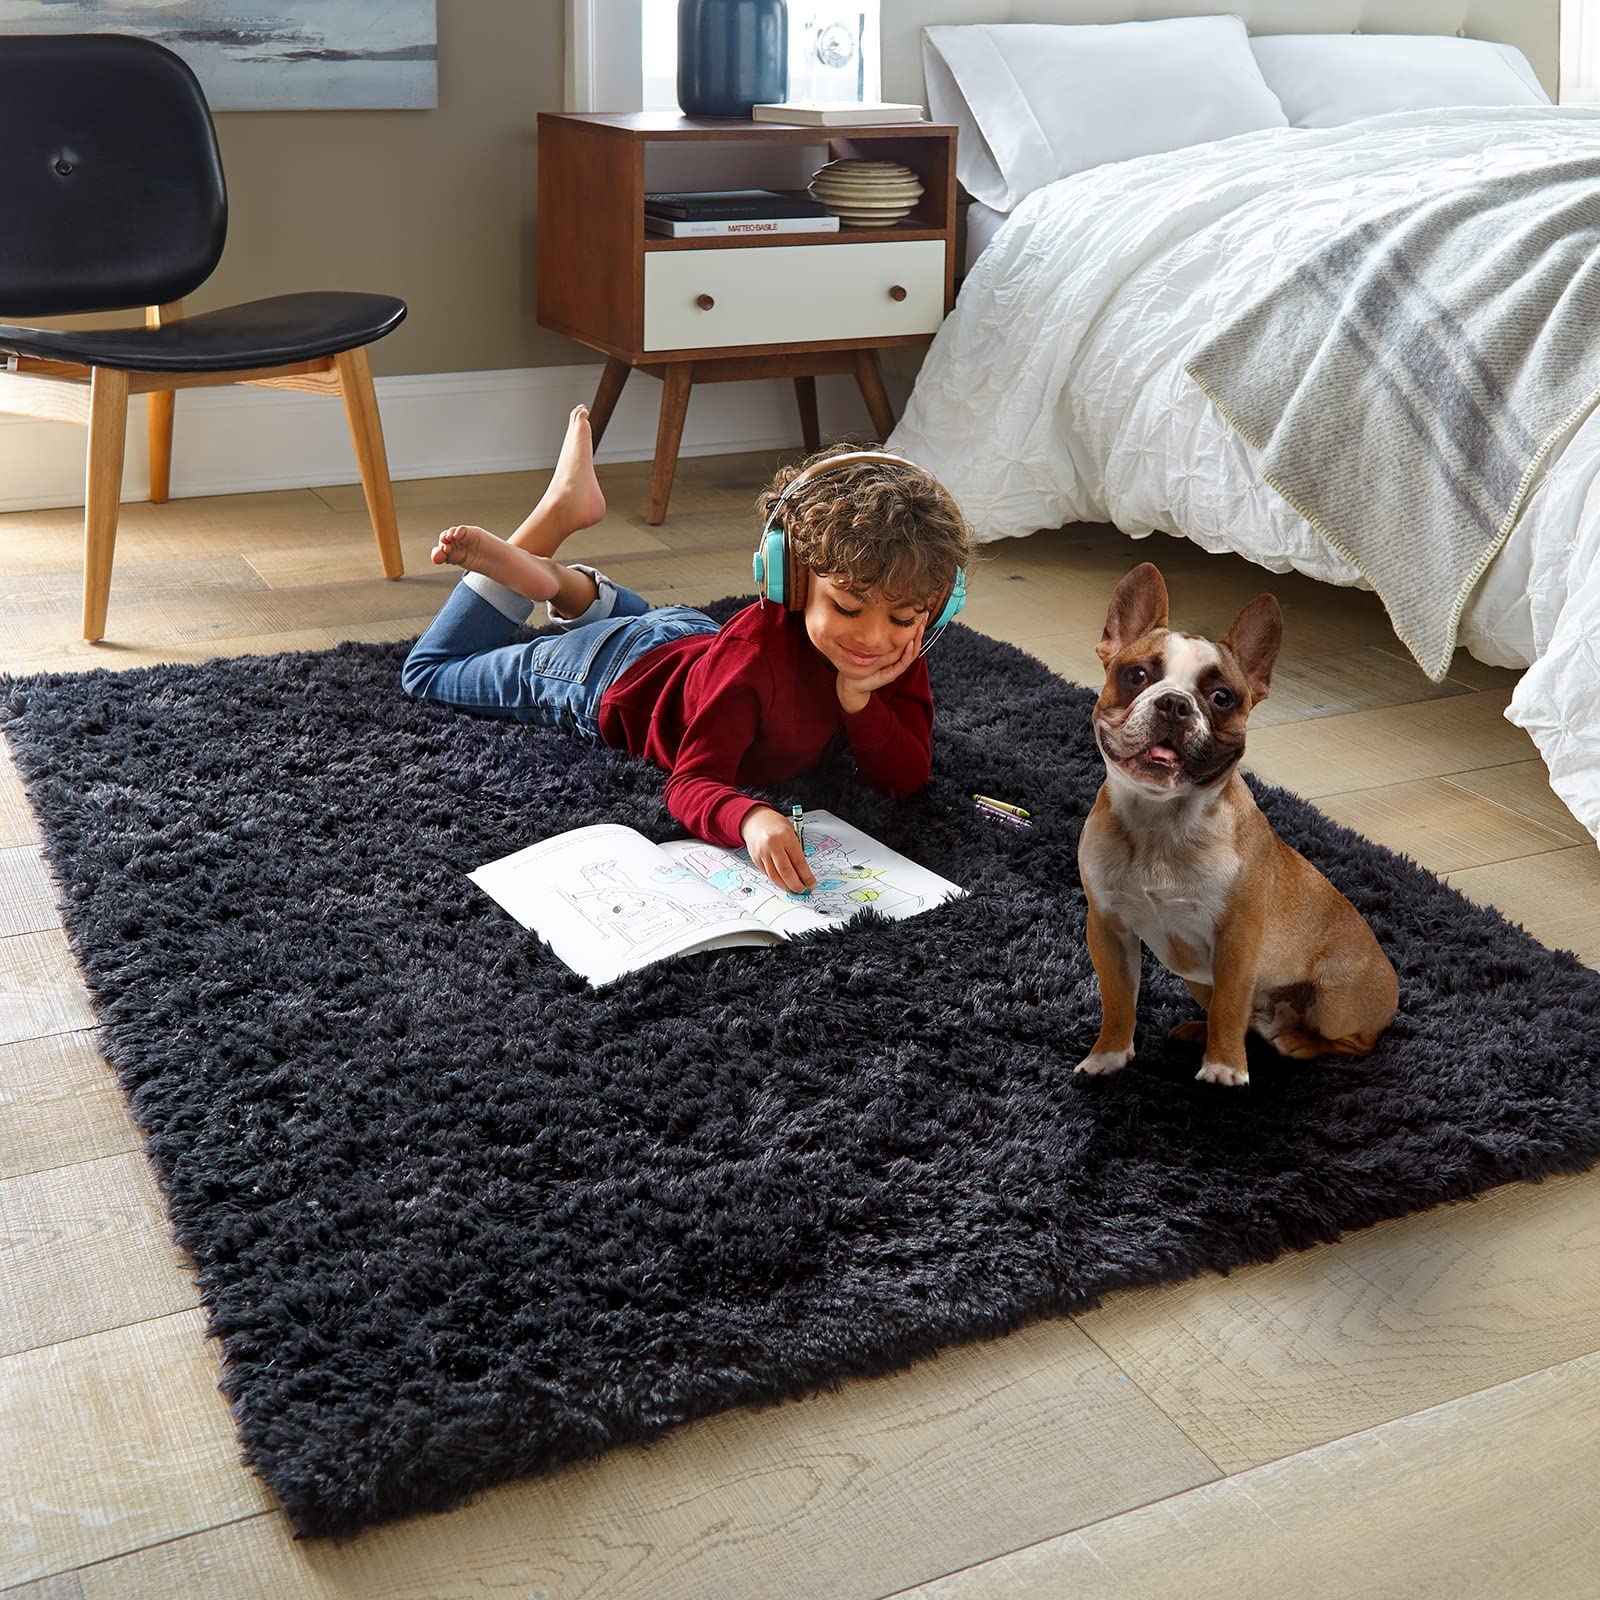 Ophanie Black Rugs for Bedroom, Machine Washable Fluffy Shaggy Soft Area Rug, Non-Slip Indoor Floor carpet for Living Room, Kids